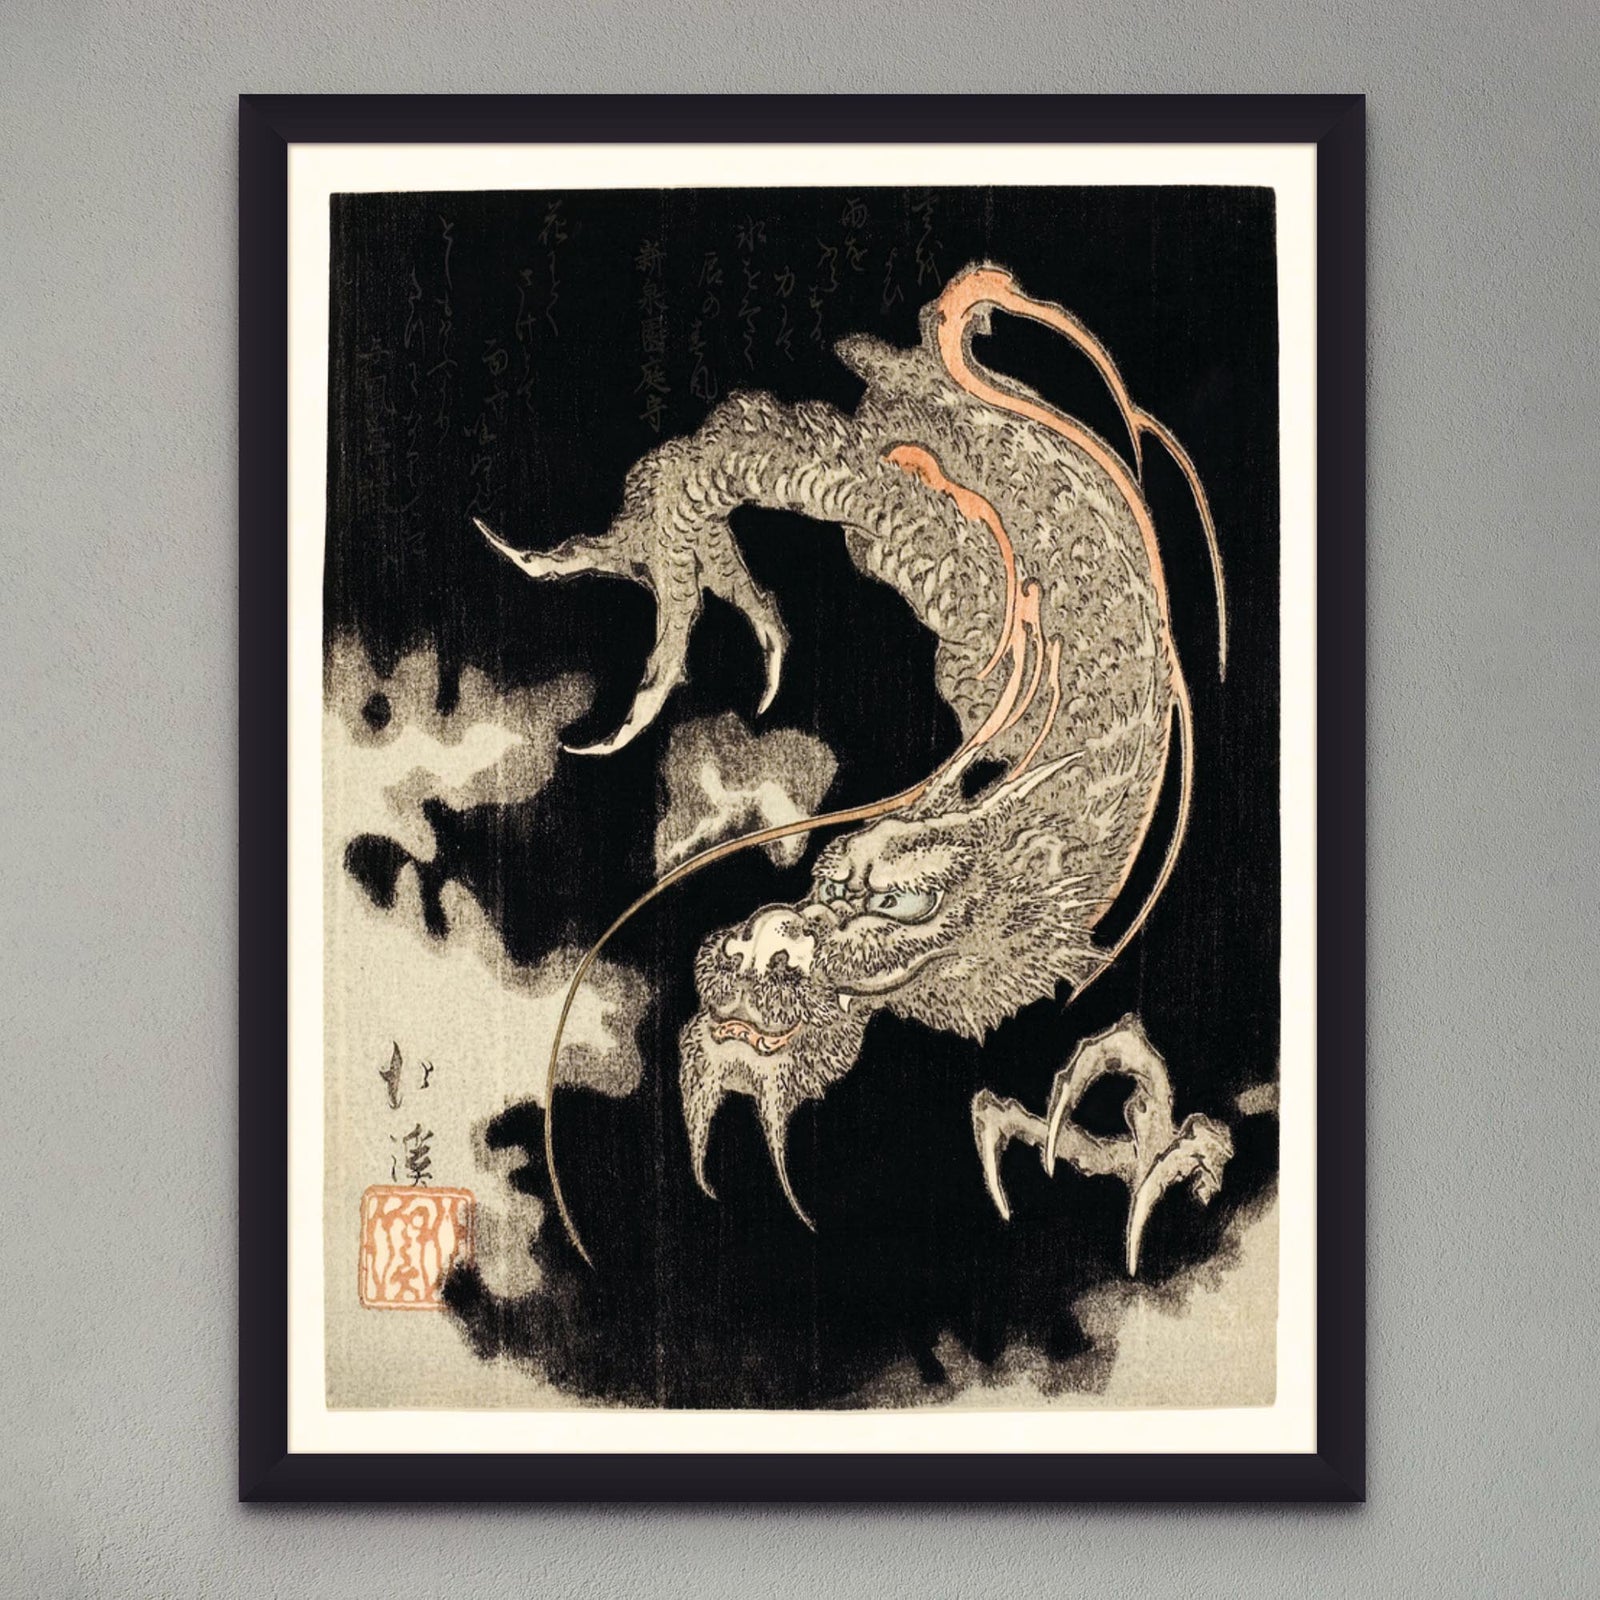 Framed Print Framed Storm Dragon Against a Black Sky with Clouds and Poems, Totoya Hokkei Japanese Framed Print